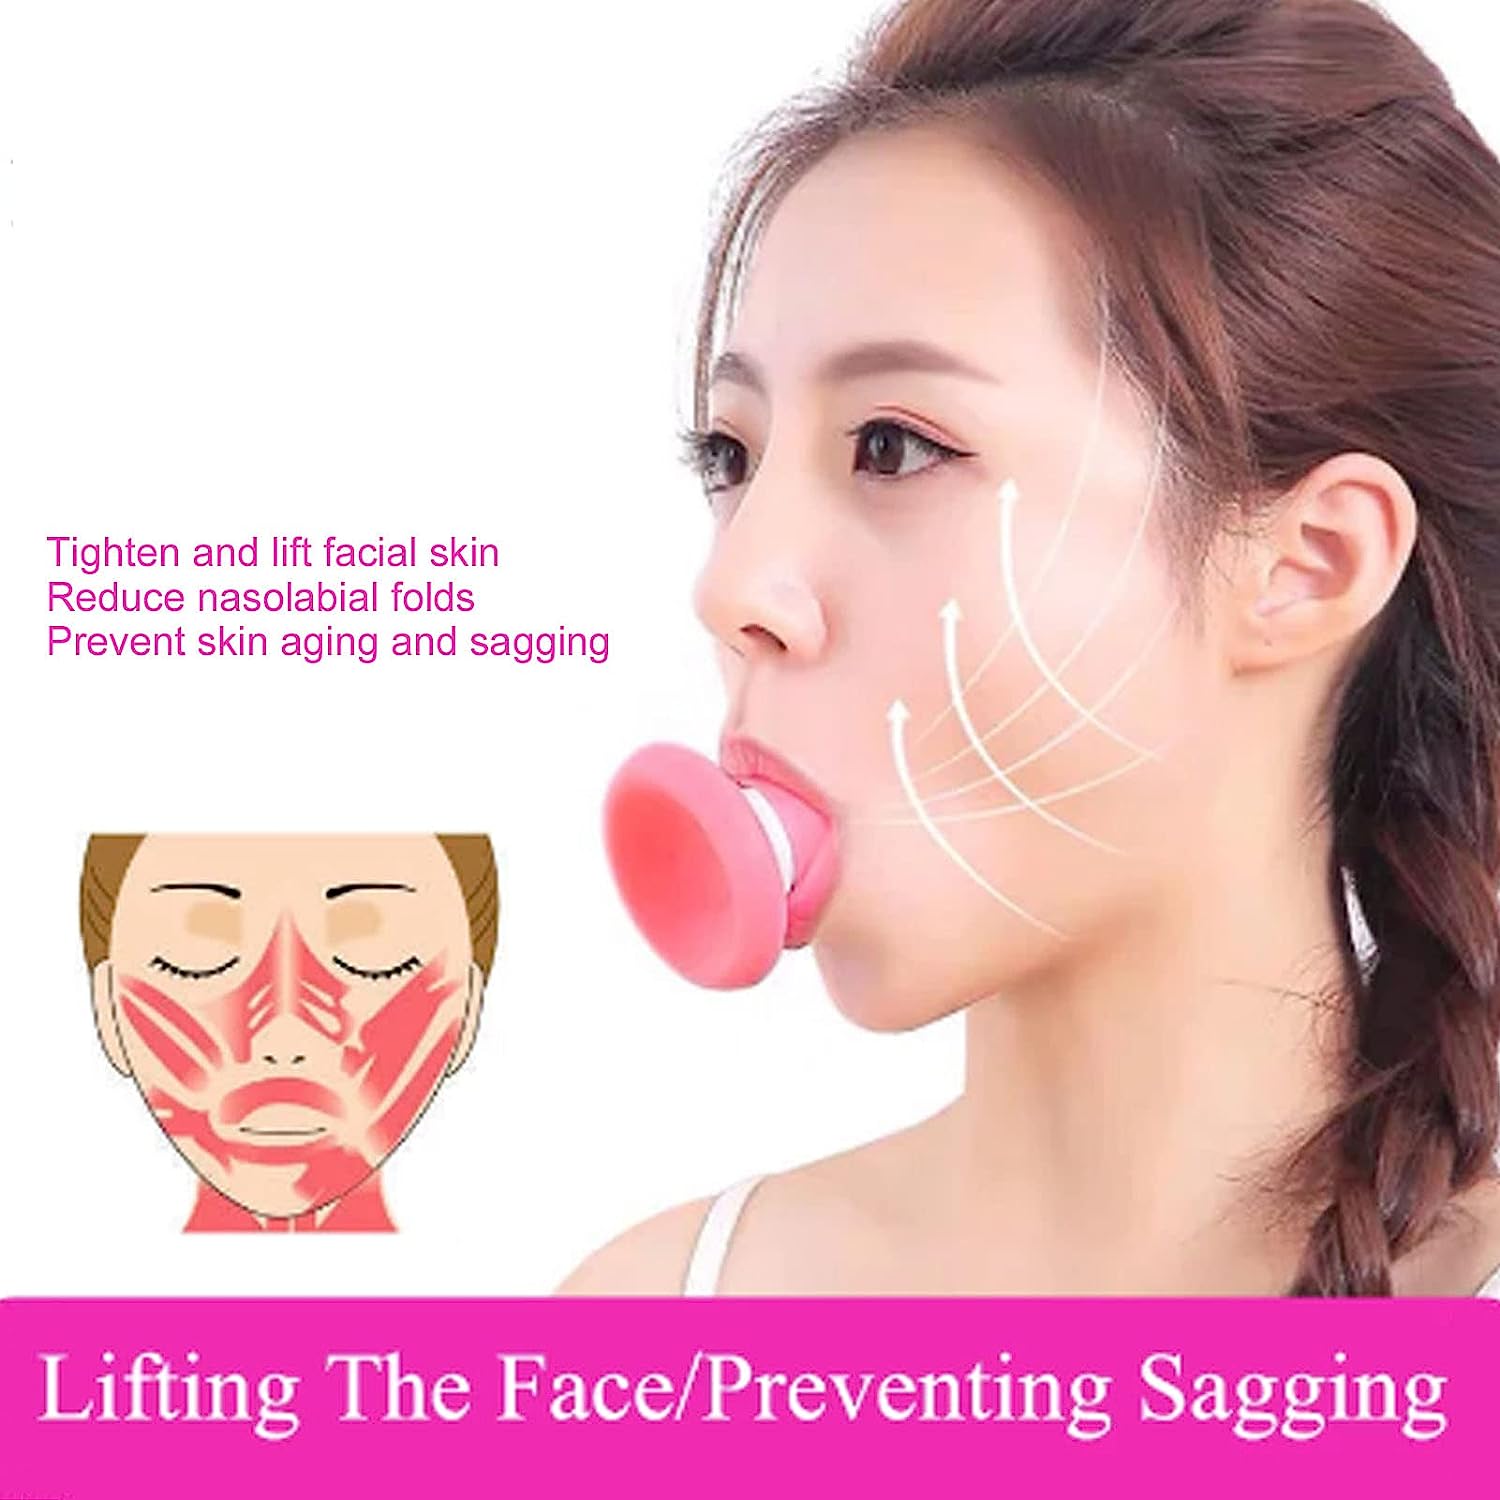 Silicone Facial Jaw Exerciser Breathing Type Face Slimmer, Breathing Type Face Slimmer Face Lift Inhaling & Exhaling Tool, Look Younger and Healthier - Helps Reduce Stress and Cravings